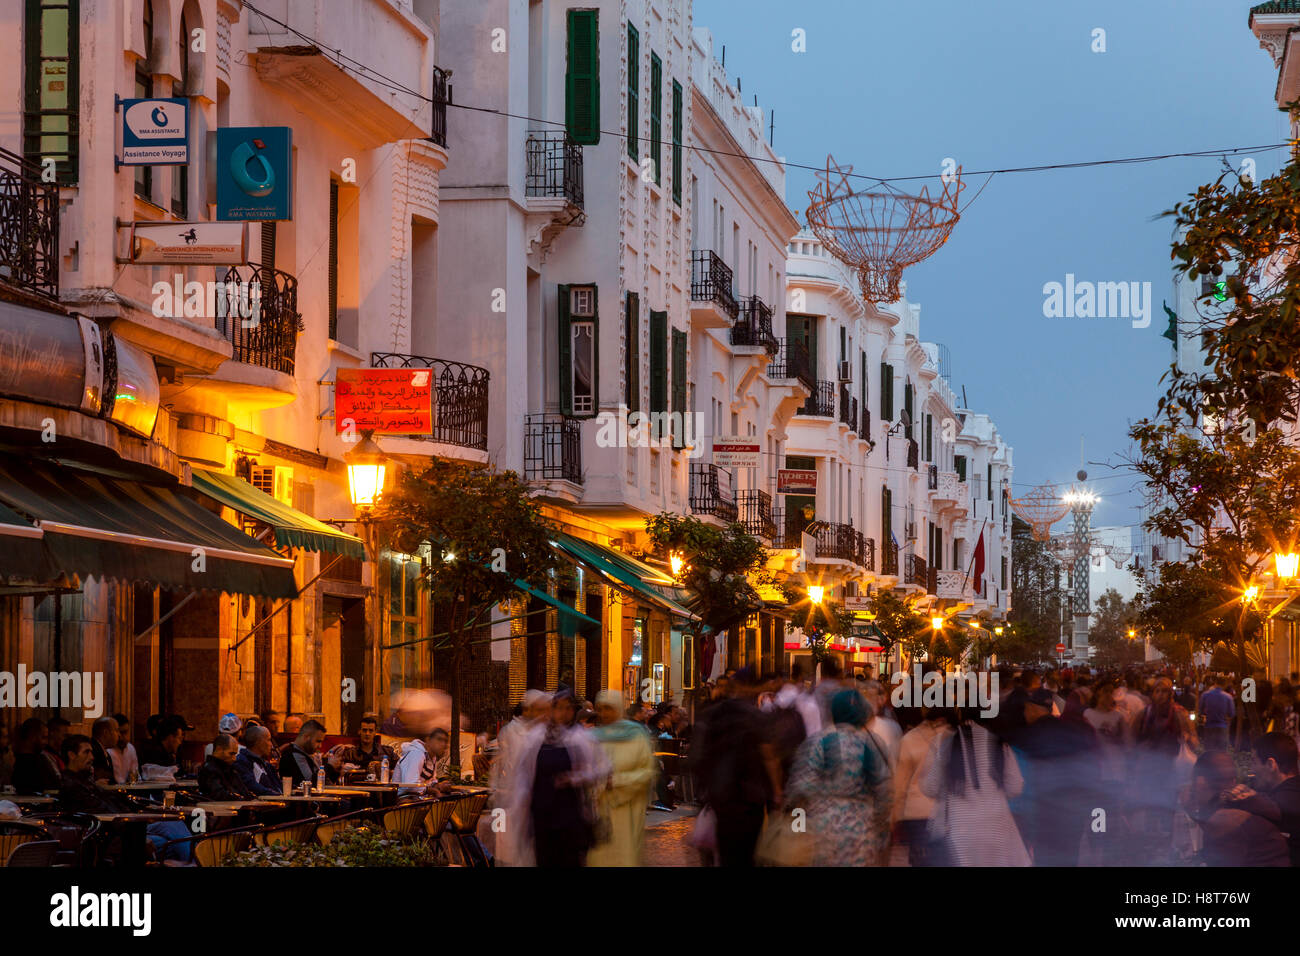 Spanish Colonial Architecture (The Ensanche) At Night, Tetouan, Morocco Stock Photo